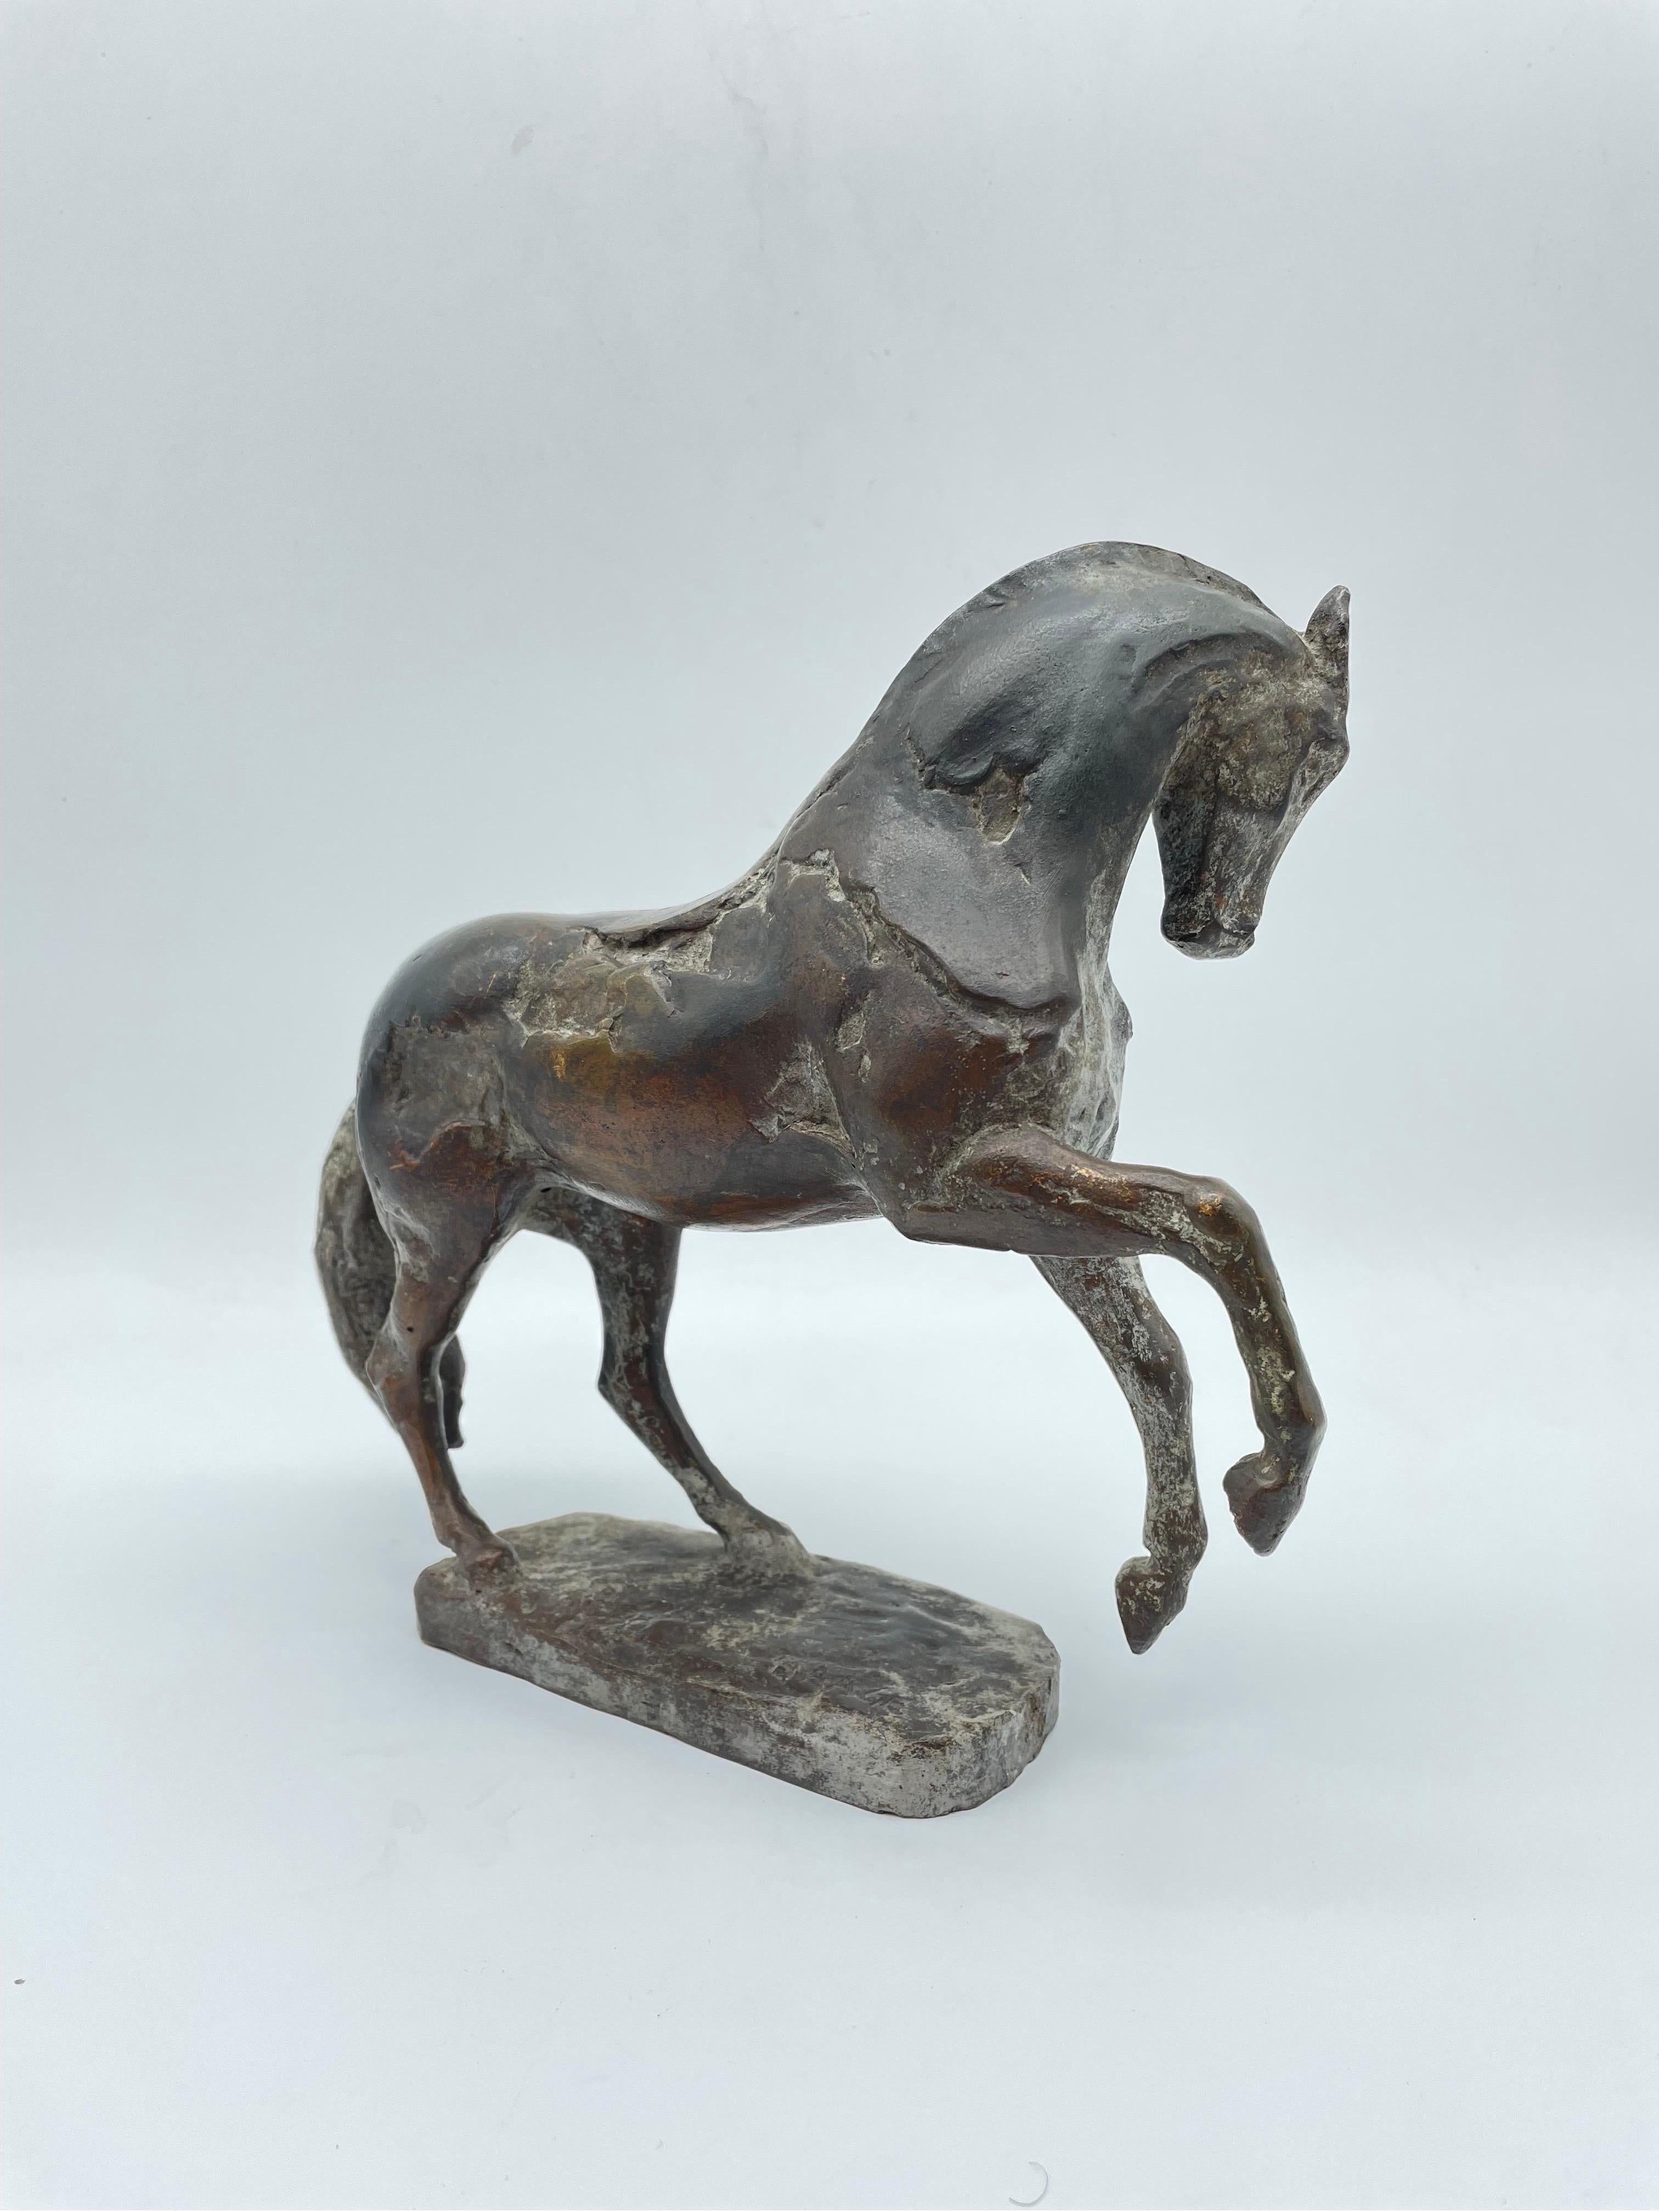 Beautiful bronze sculpture rearing horse signed Annemarie Haage

Solid bronze, rising Pfred. Rounded rectangular base, signed A. Haage Very decorative and solid cast bronze.

Annemarie HAAGE is an artist from Berlin who was born in